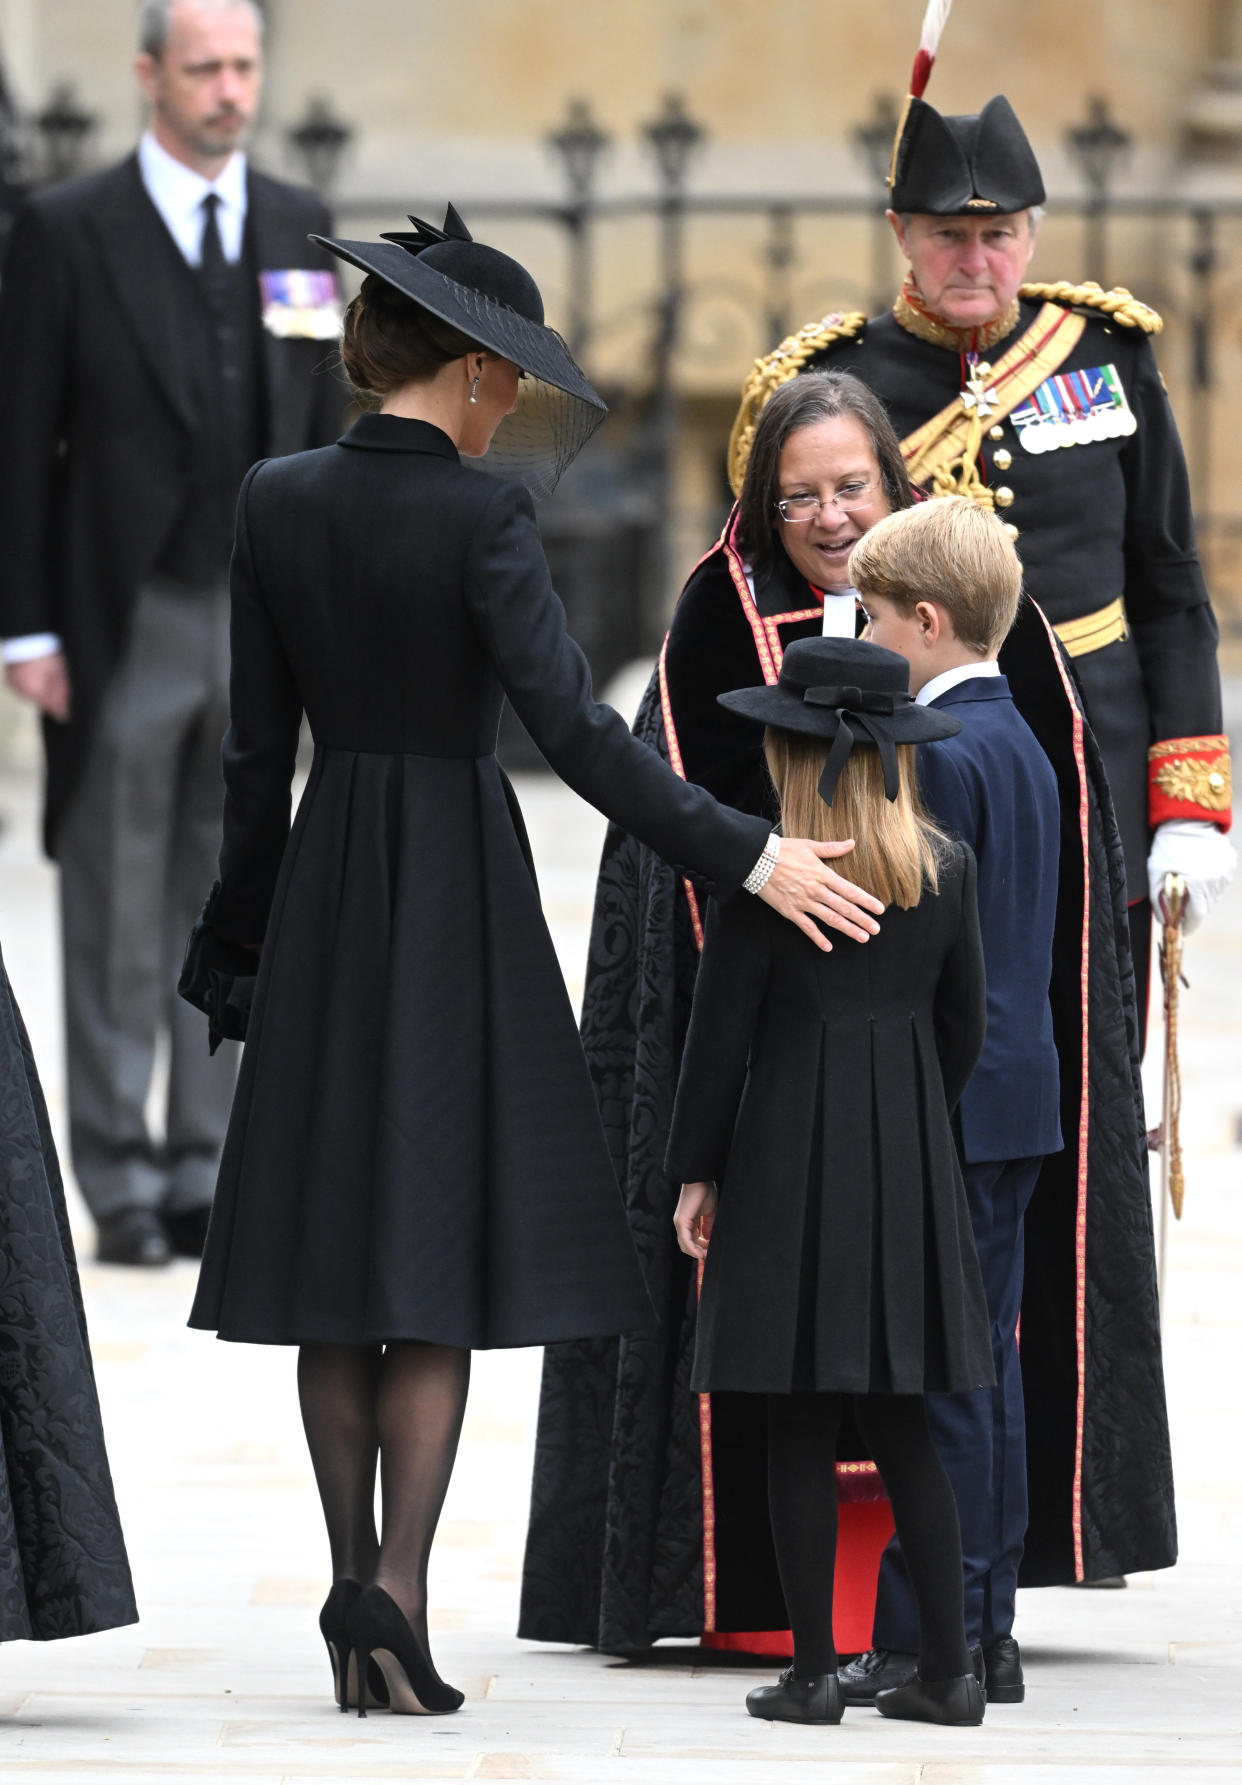 Prince George and Princess Charlotte arrived at Westminster Abbey with their mother, the Princess of Wales. (Getty Images)